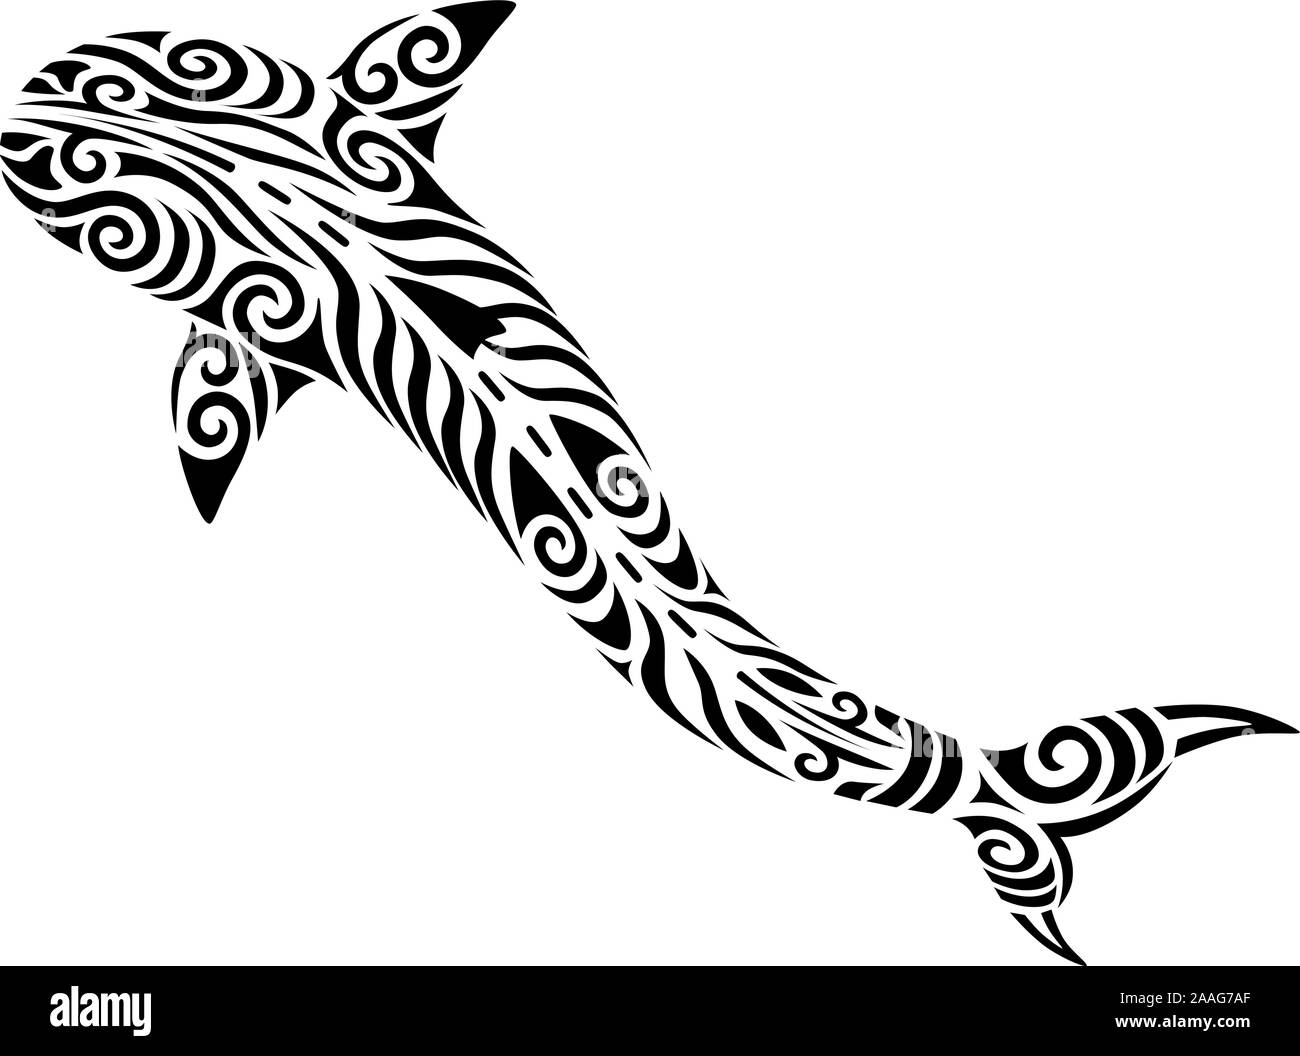 Black Line Sharks On White Background Hand Drawn Linear Sketch Stock  Vector  Illustration of icon contour 1301162  Shark tattoos Shark  drawing Illustration